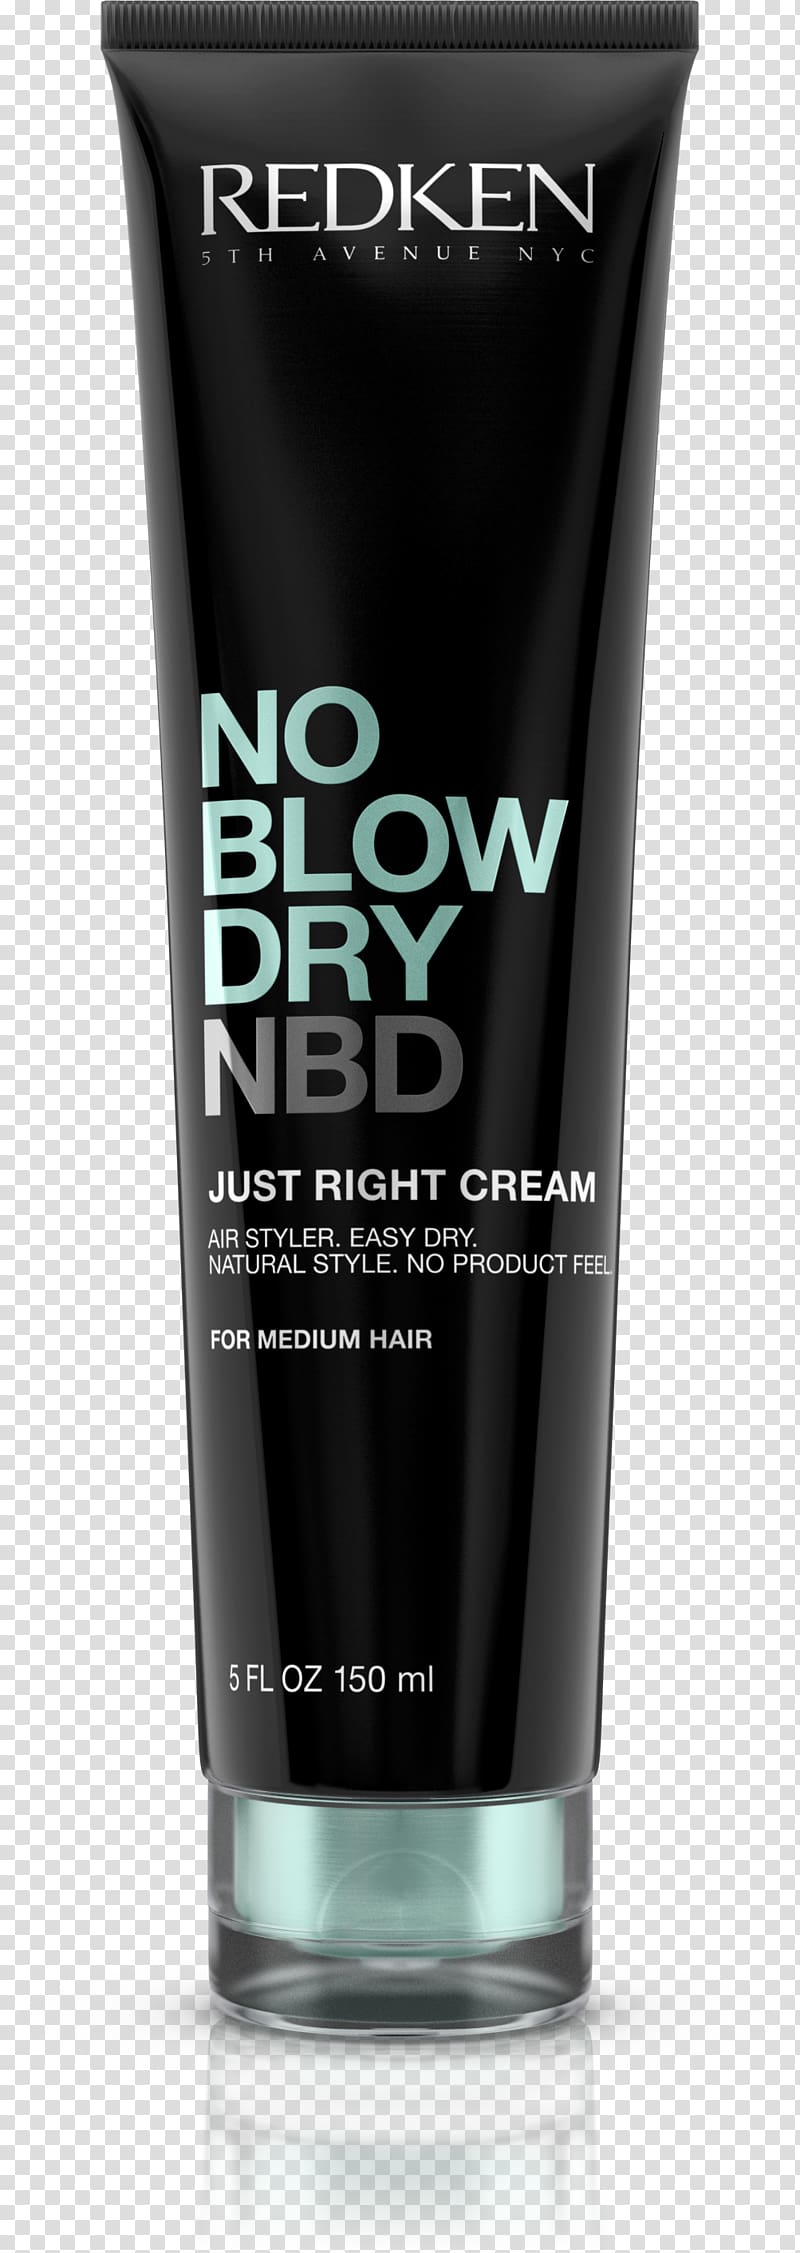 Redken No Blow Dry Airy Cream Hair Styling Products Redken No Blow Dry Bossy Cream Hair Care, hair transparent background PNG clipart